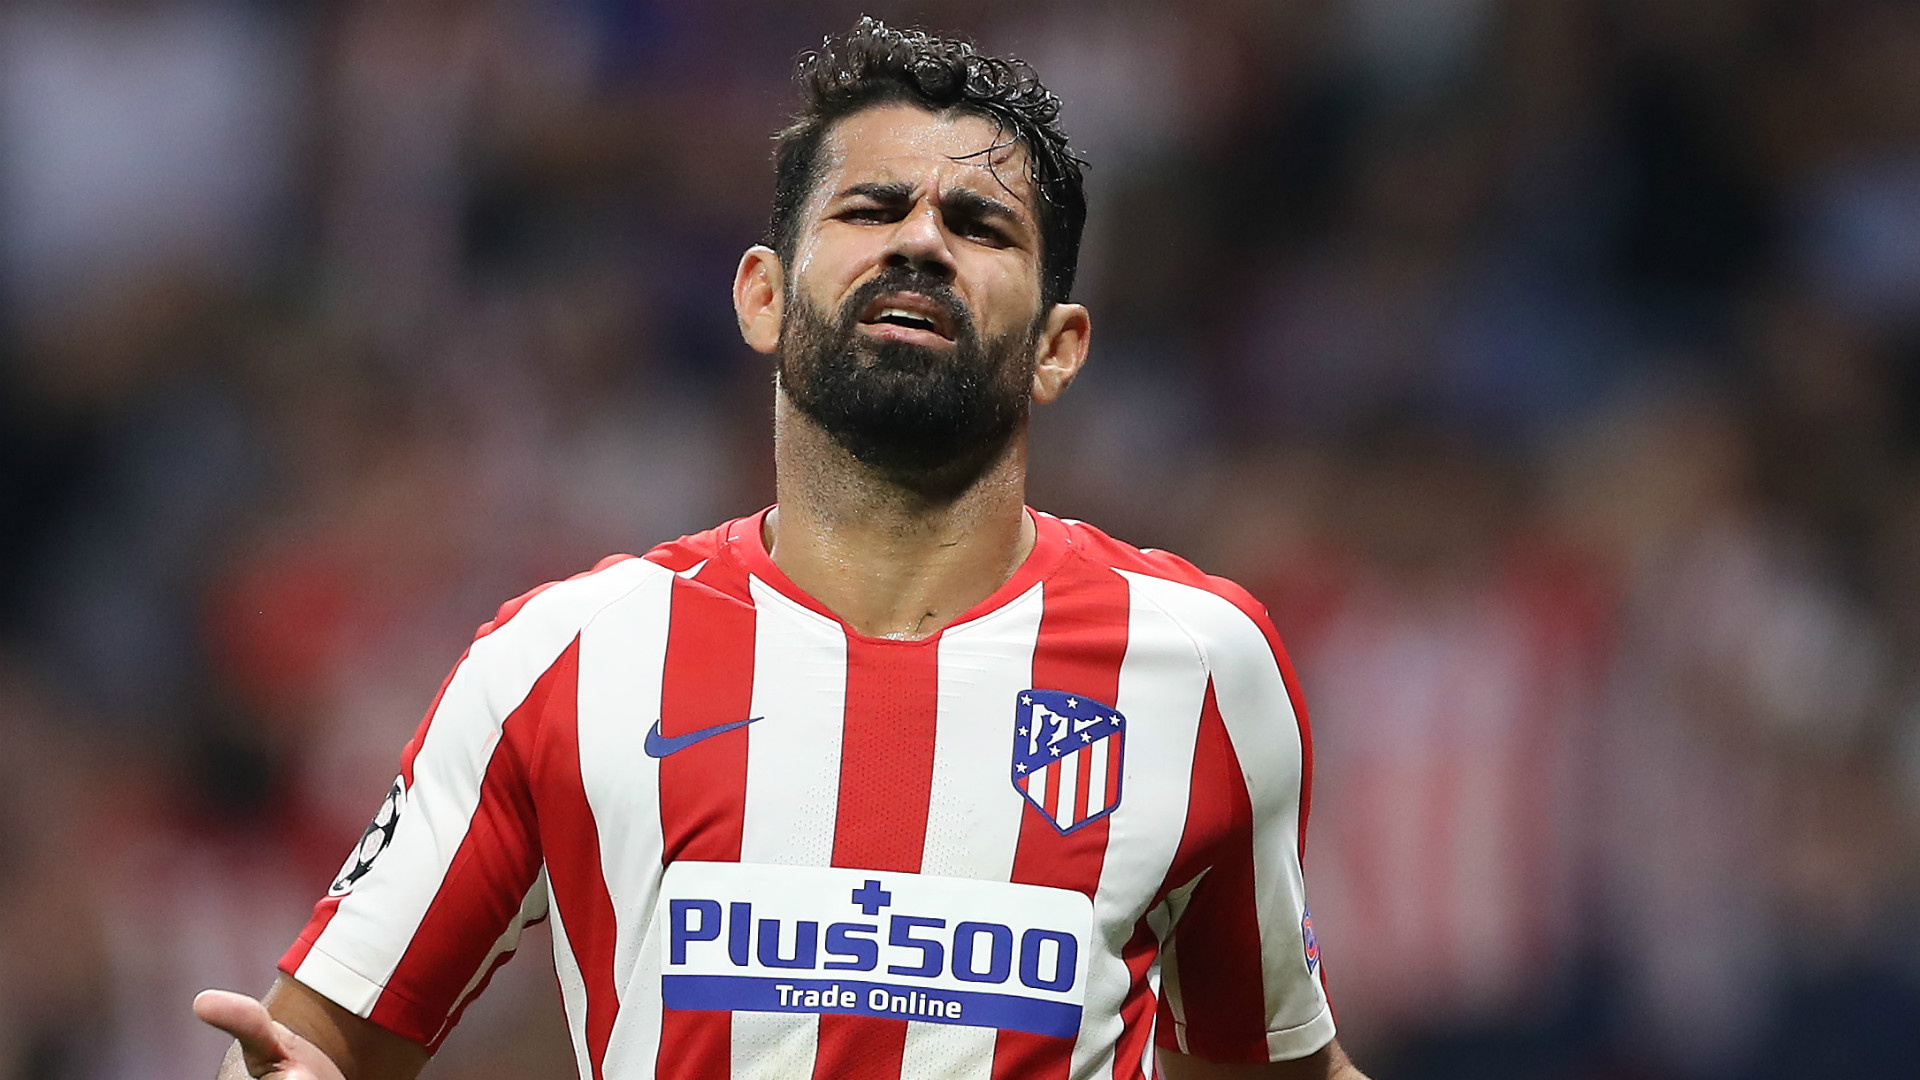 Diego Costa: Former Chelsea and Atletico Madrid striker. 1920x1080 Full HD Wallpaper.